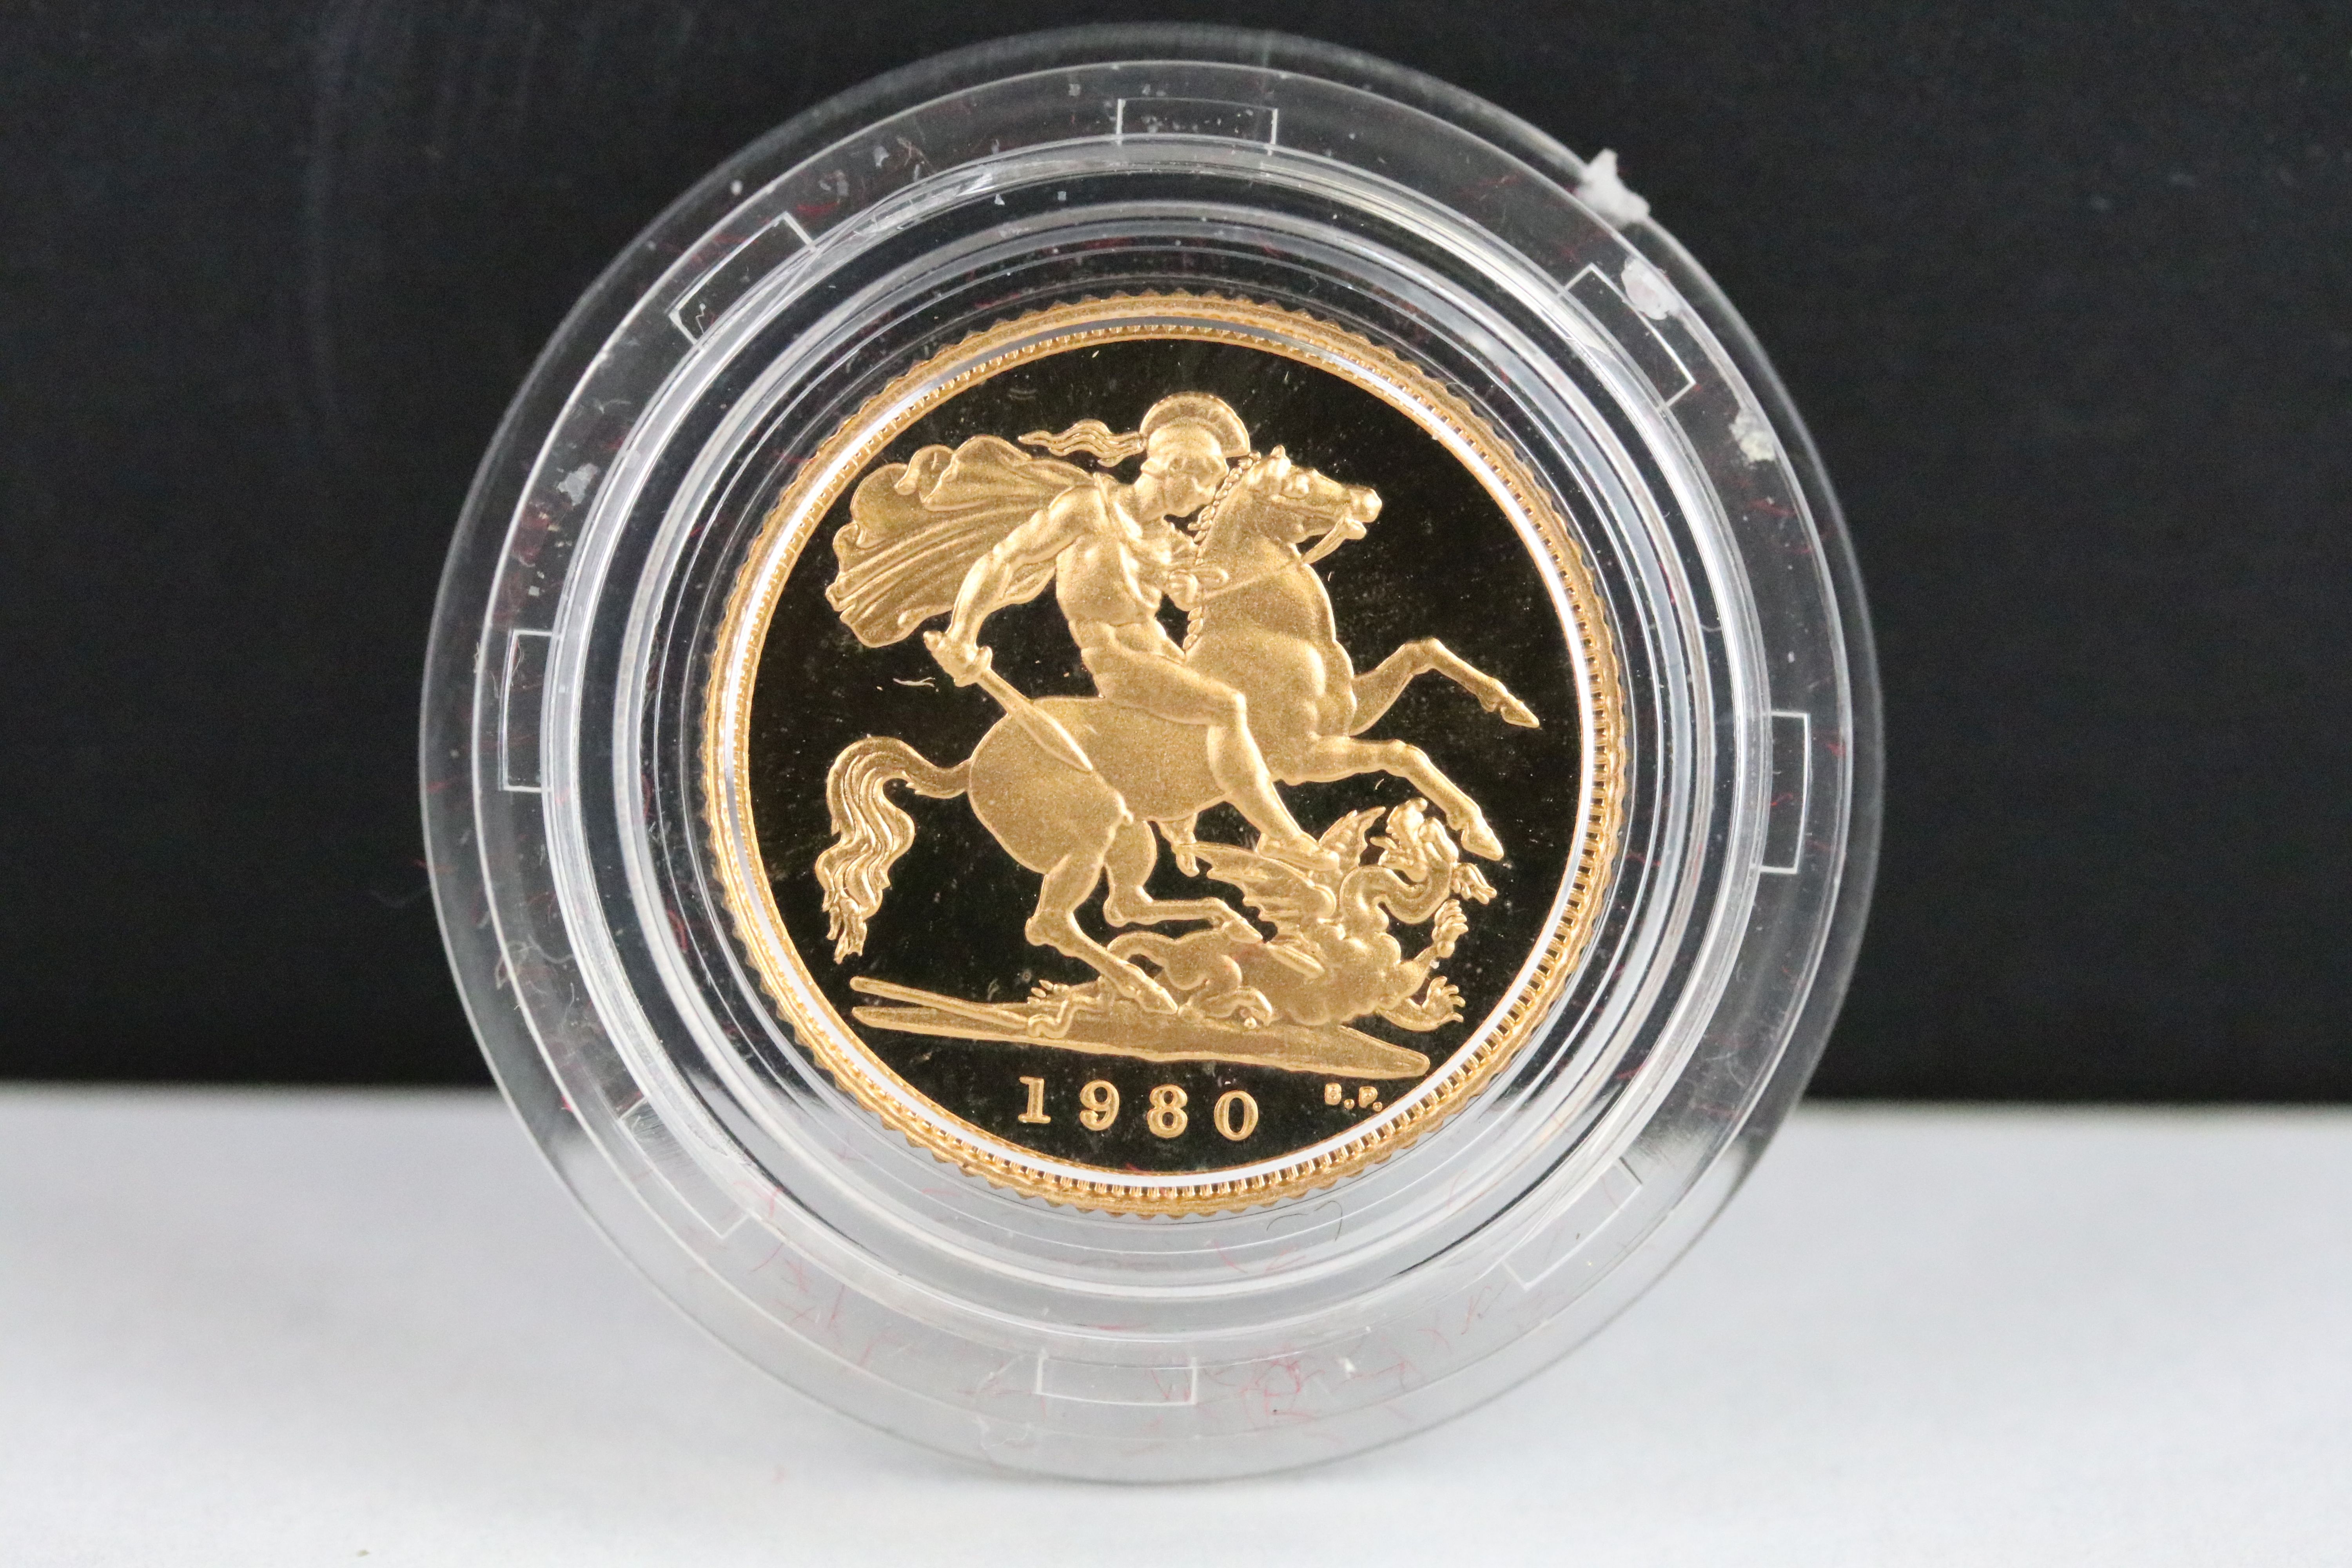 A British Royal Mint Queen Elizabeth II proof 1980 gold half sovereign coin encapsulated within - Image 2 of 4